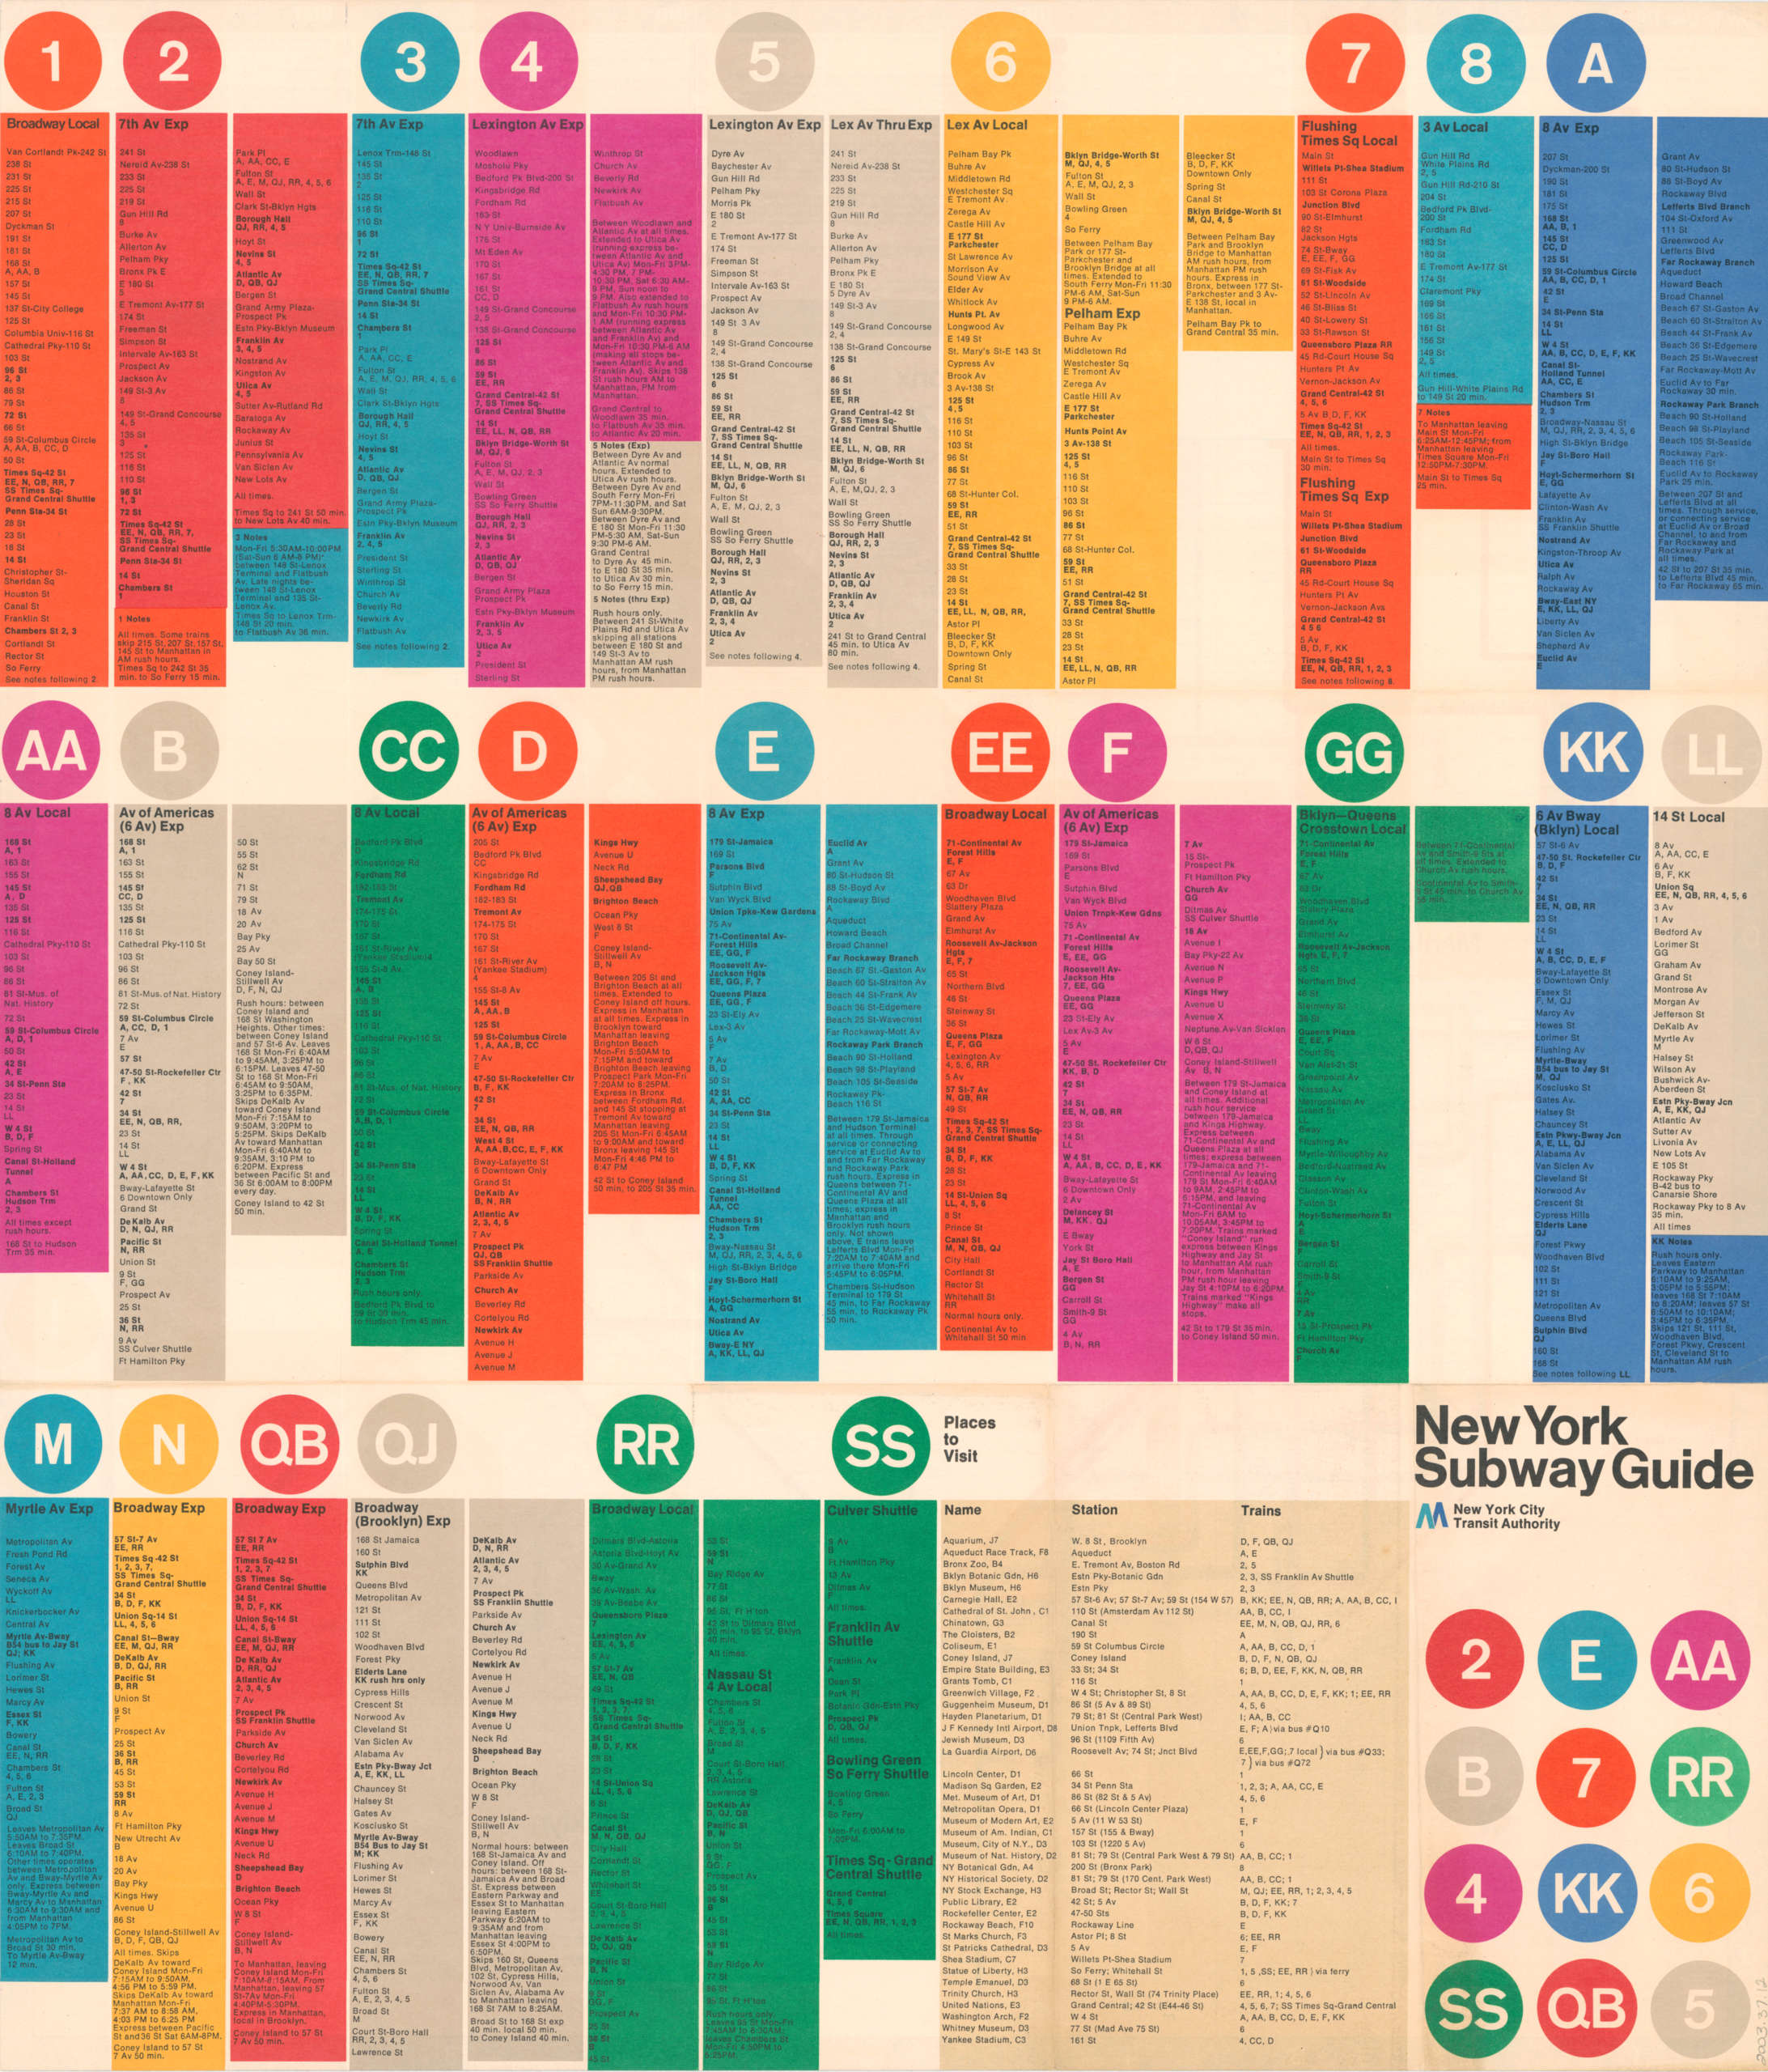 New York Subway Guide, 1972, 2003.37.12; New York Transit Museum Collection.